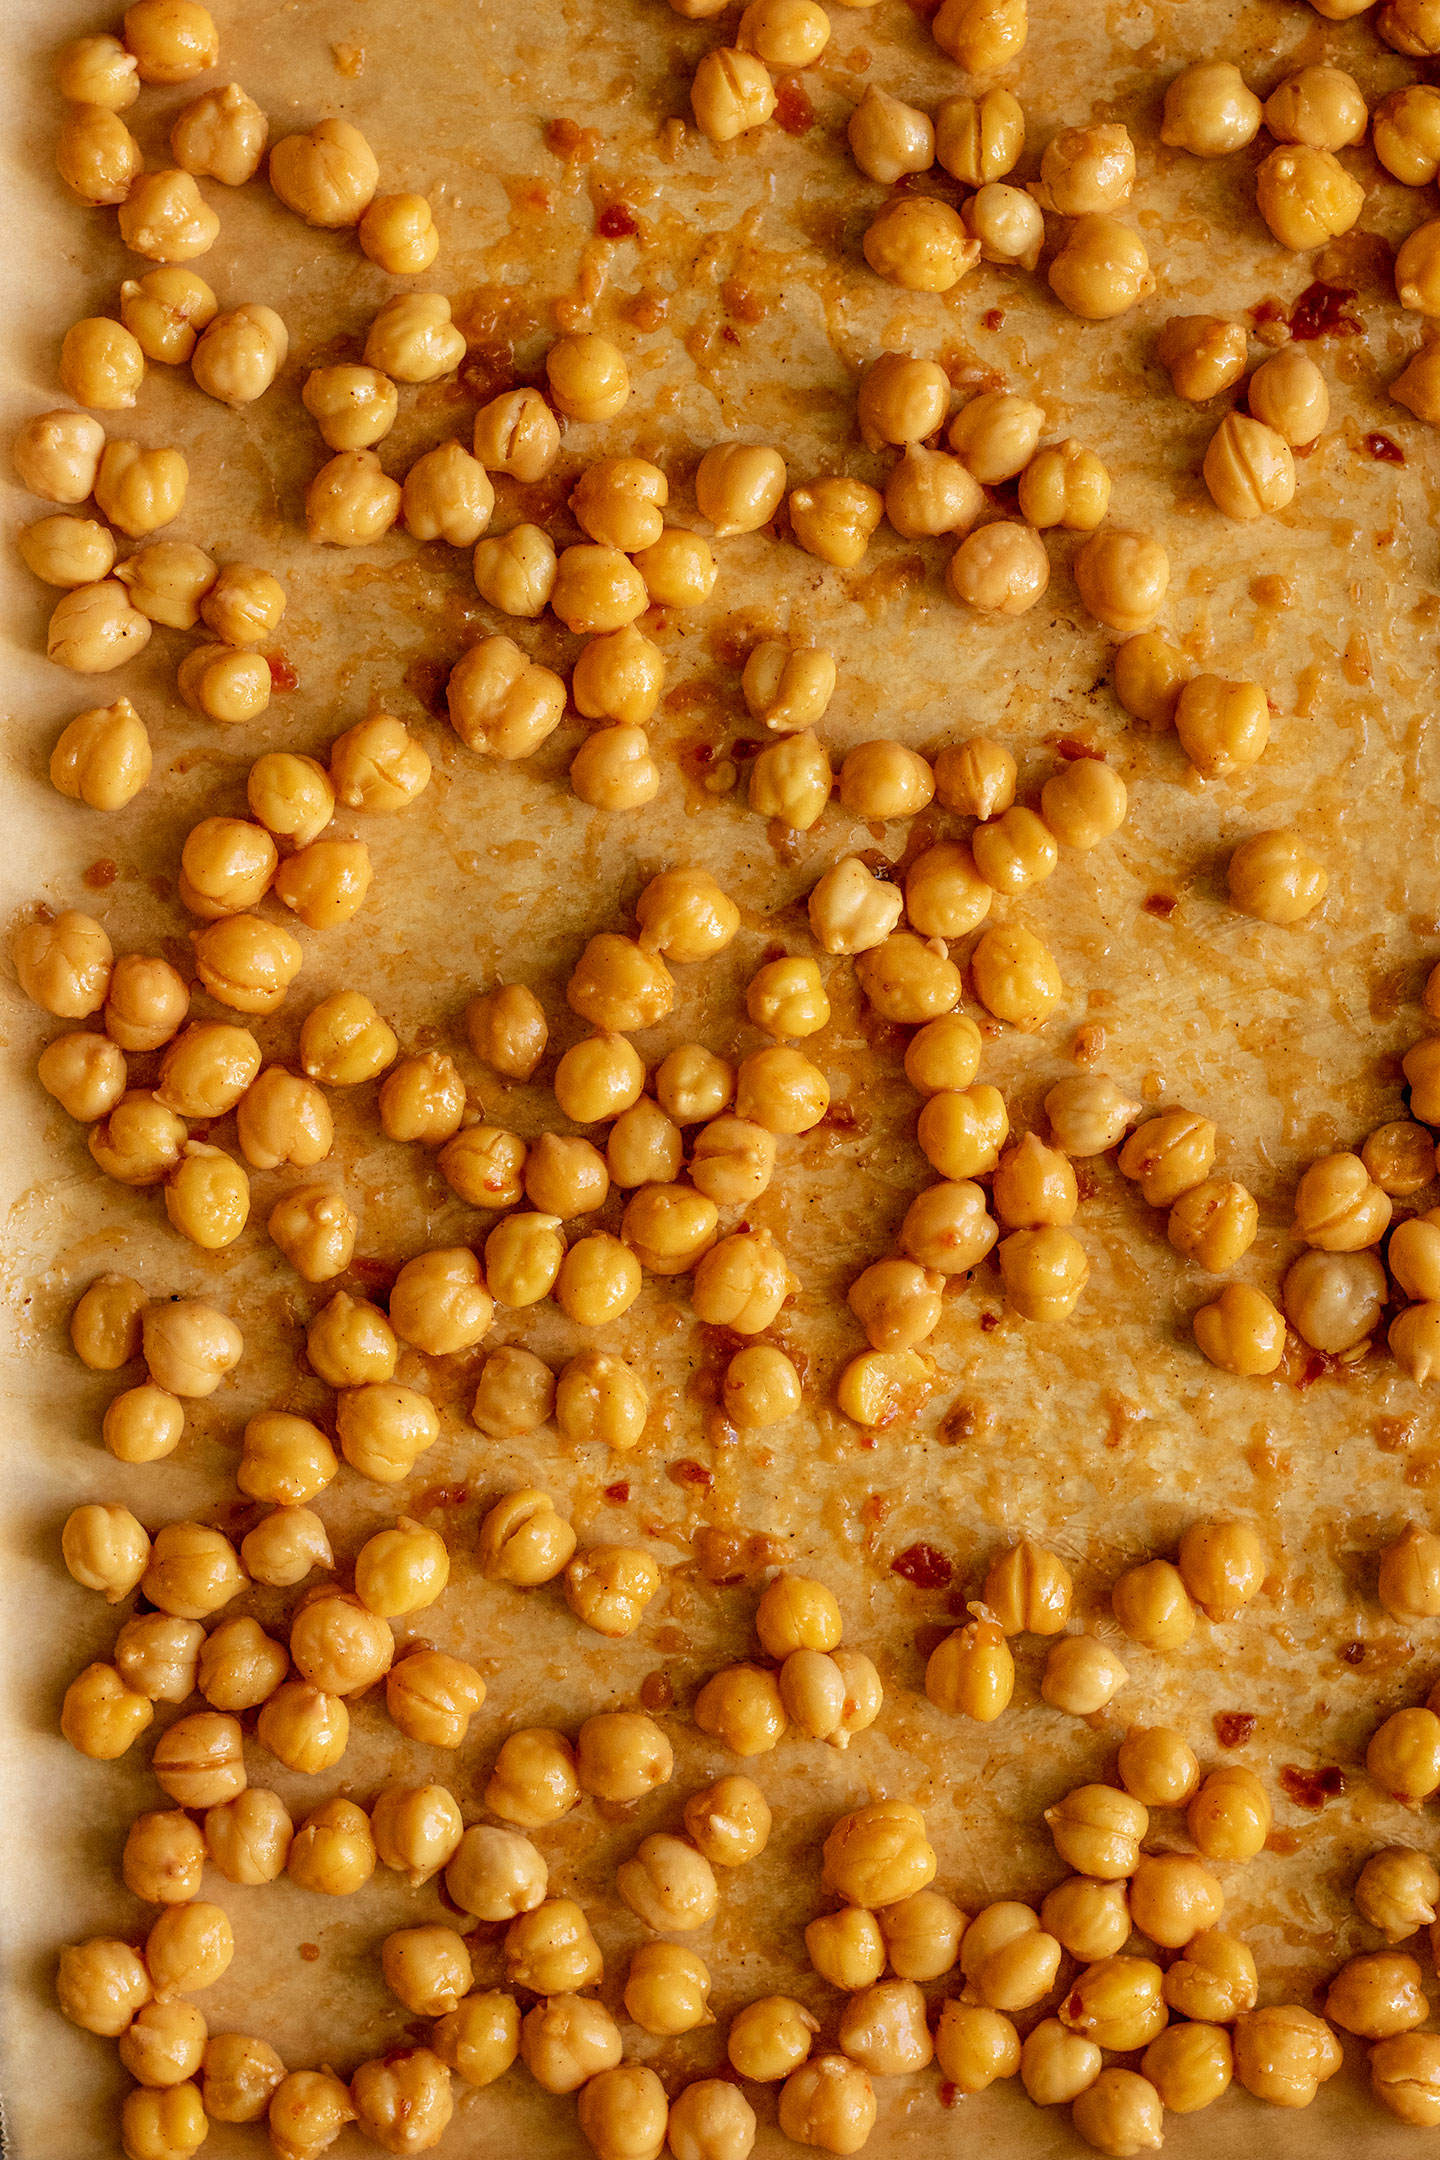 Miso coated chickpeas on a baking tray.